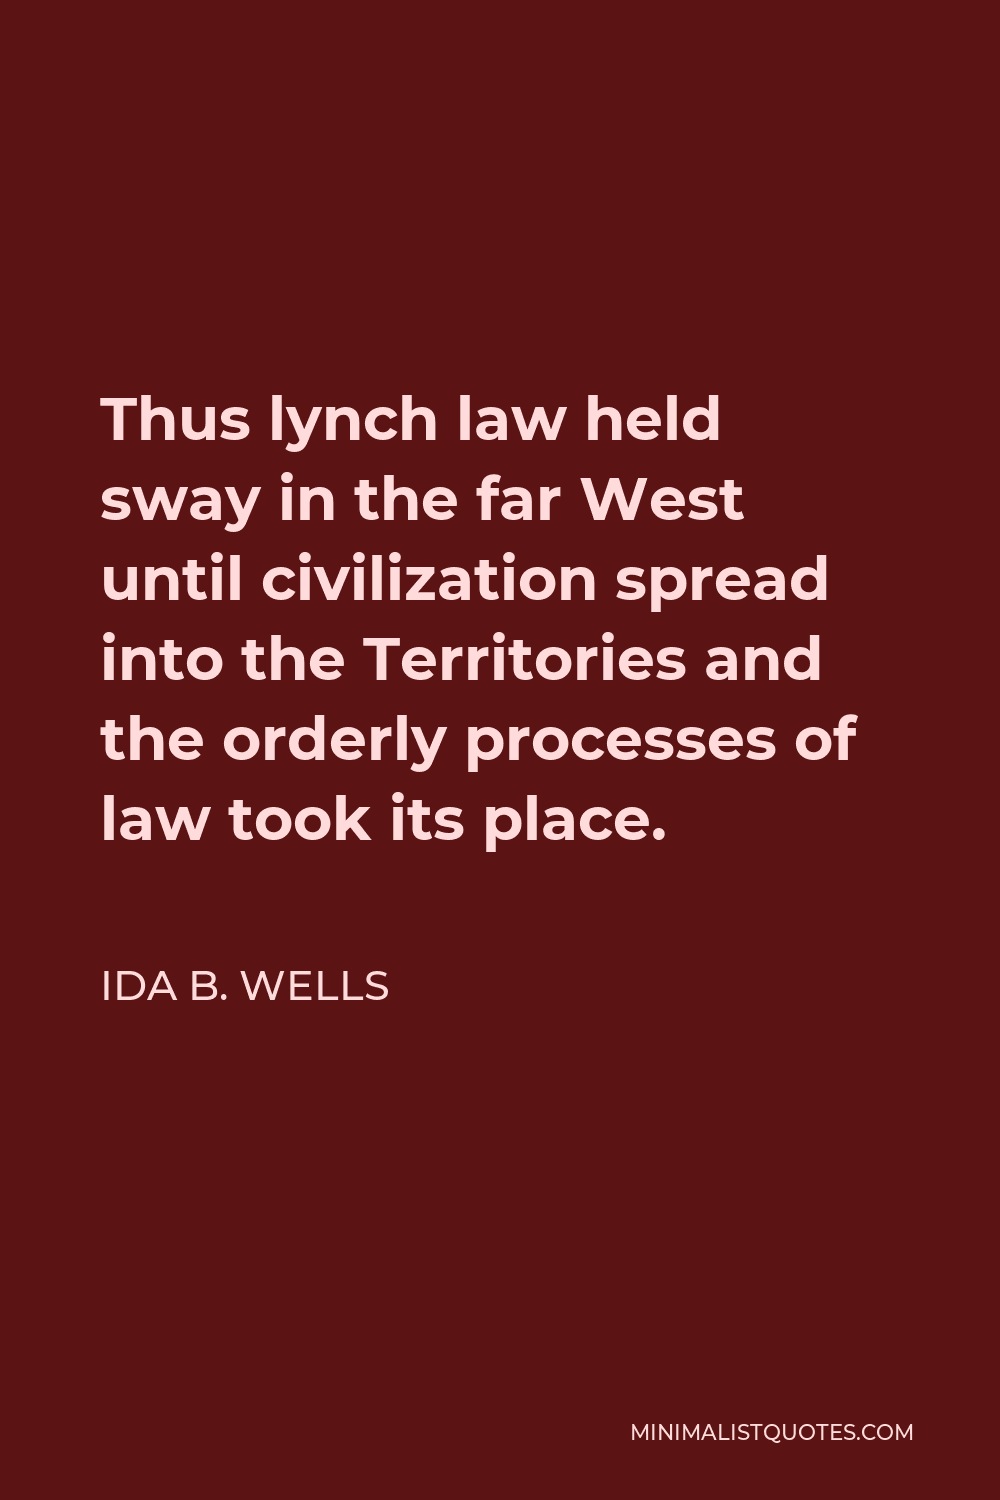 Ida B. Wells Quote - Thus lynch law held sway in the far West until civilization spread into the Territories and the orderly processes of law took its place.